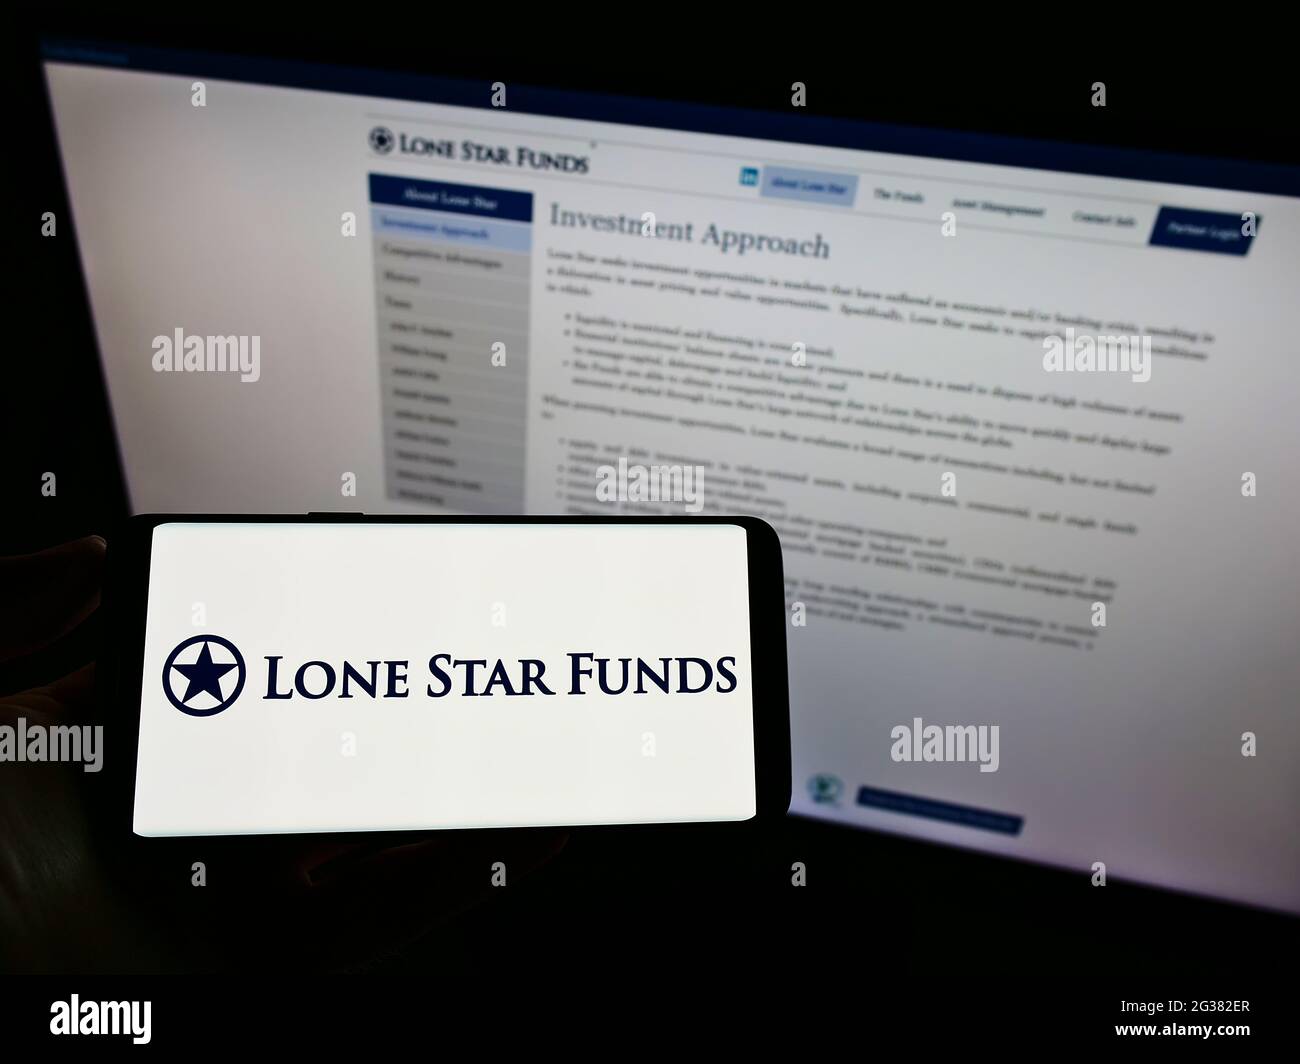 Person holding mobile phone with logo of American investment company Lone Star Funds on screen in front of business web page. Focus on phone display. Stock Photo